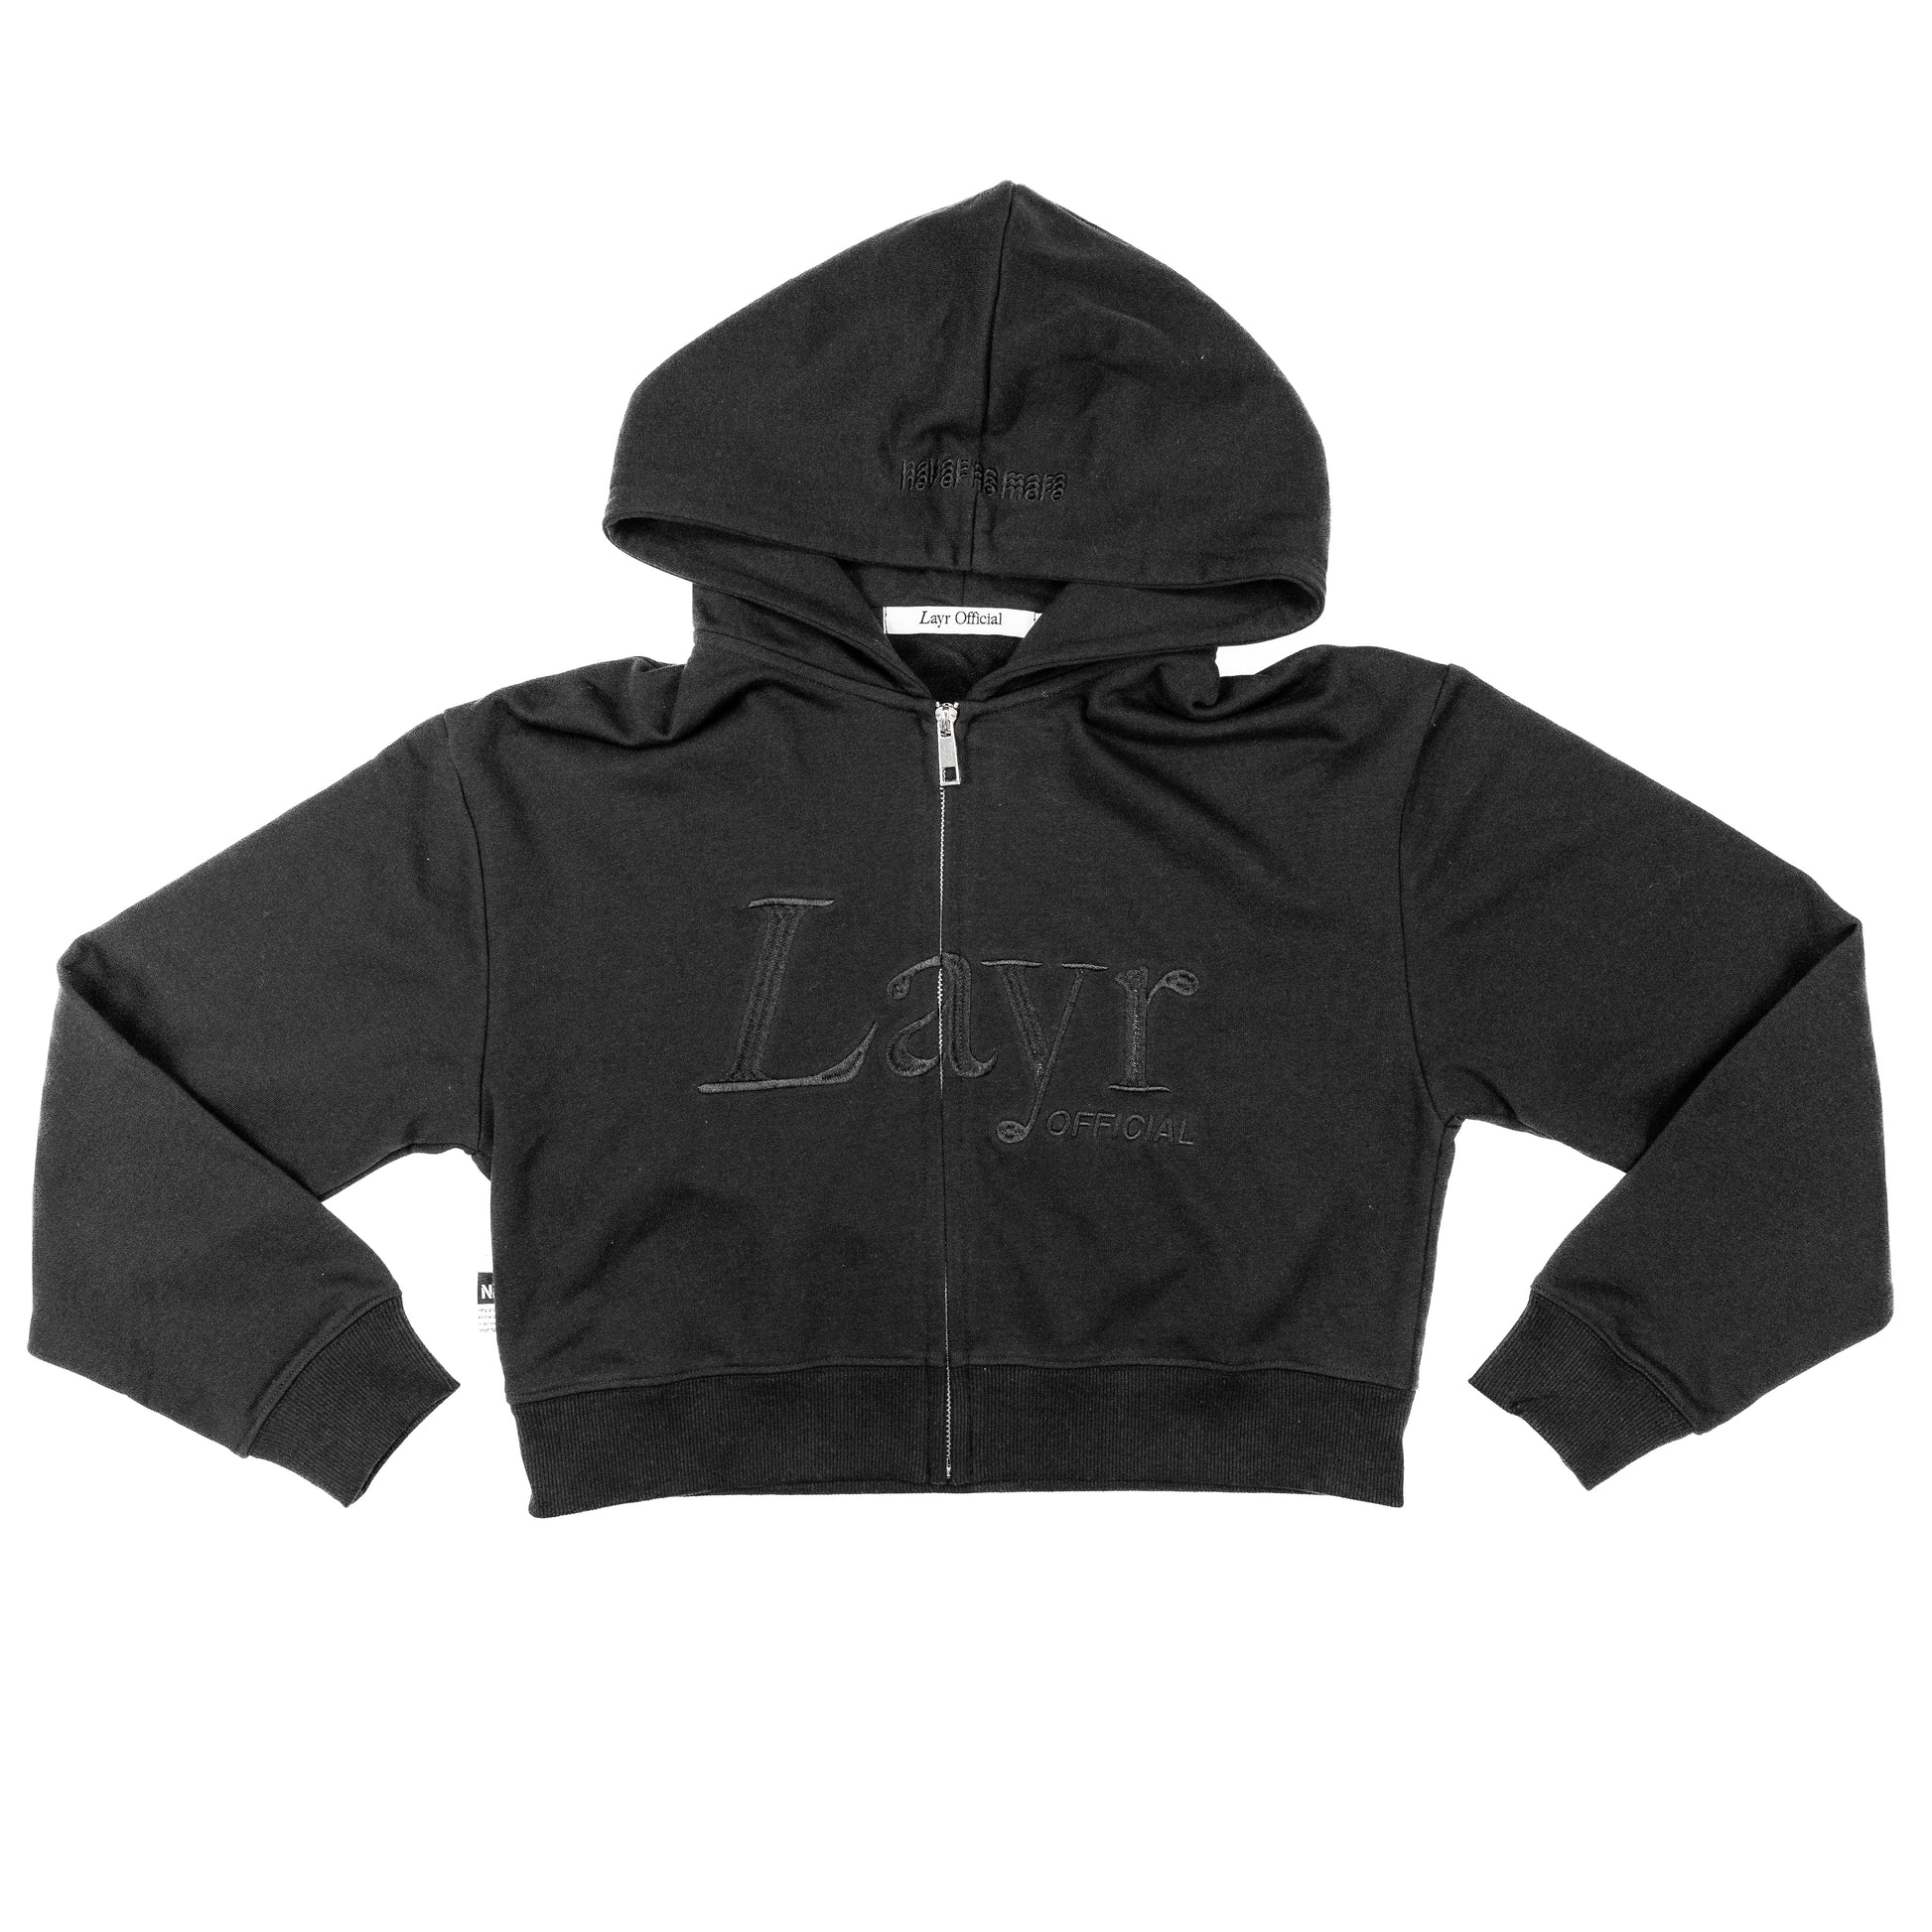 Women's Layr Official Crop Hoodie, Black - Layr Official